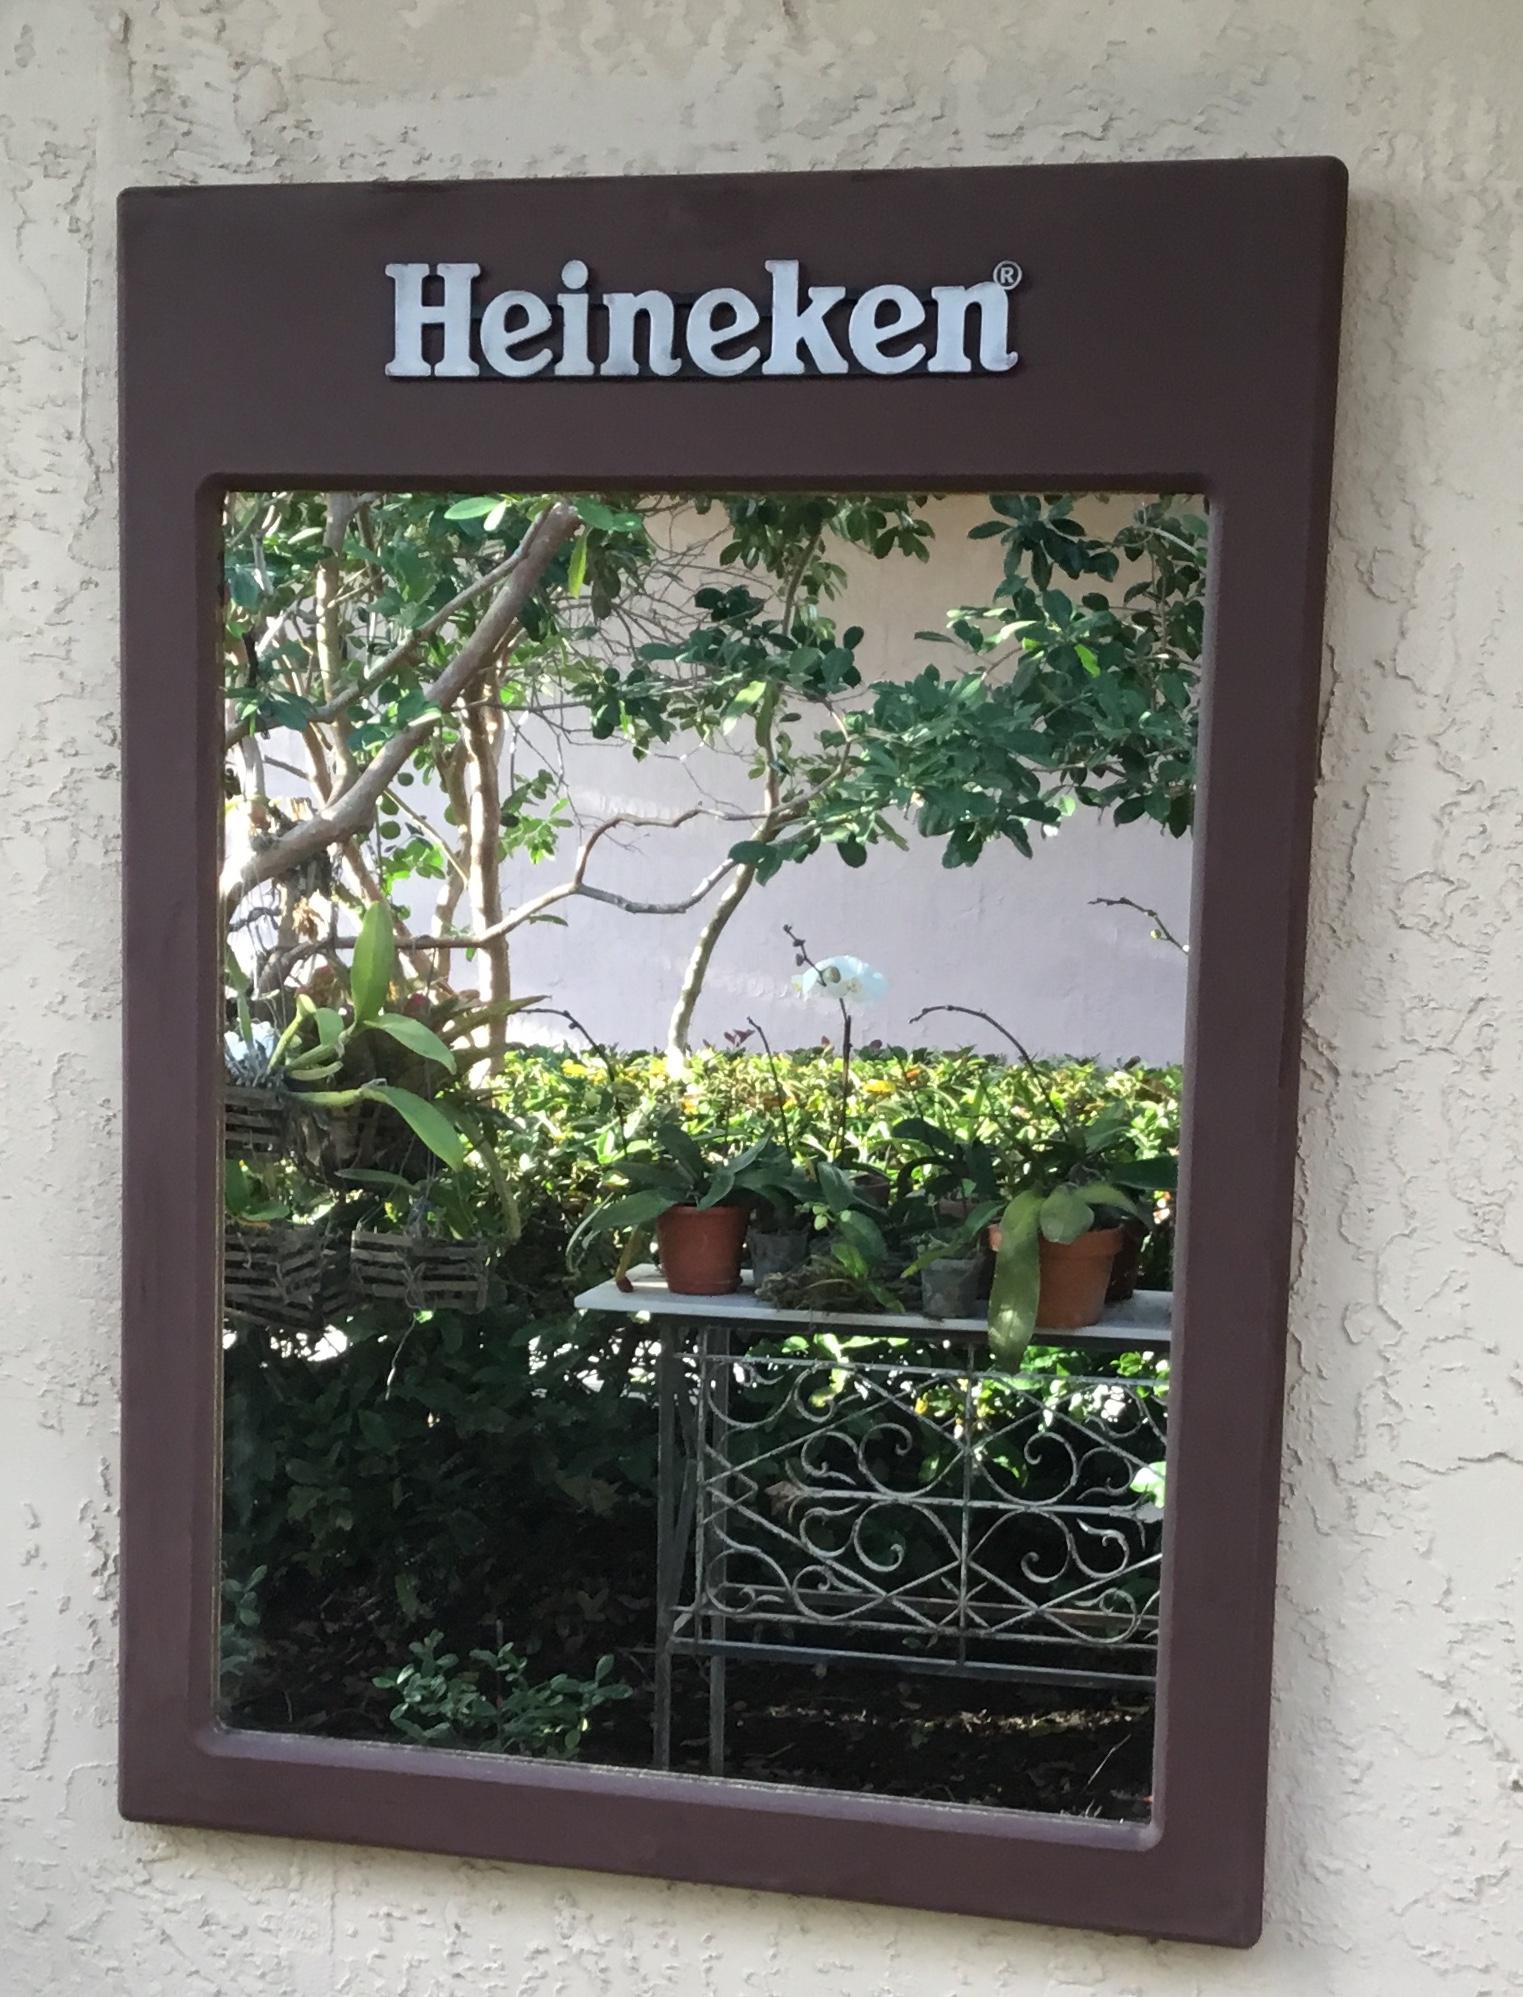 Elegant vintage wall handing mirror made of wood composite, with the advertising label of the famous beer brewery Heineken, this mirror was probably hang in a bar or restaurant and could
Be a decorative item in the right place. The glass mirror was